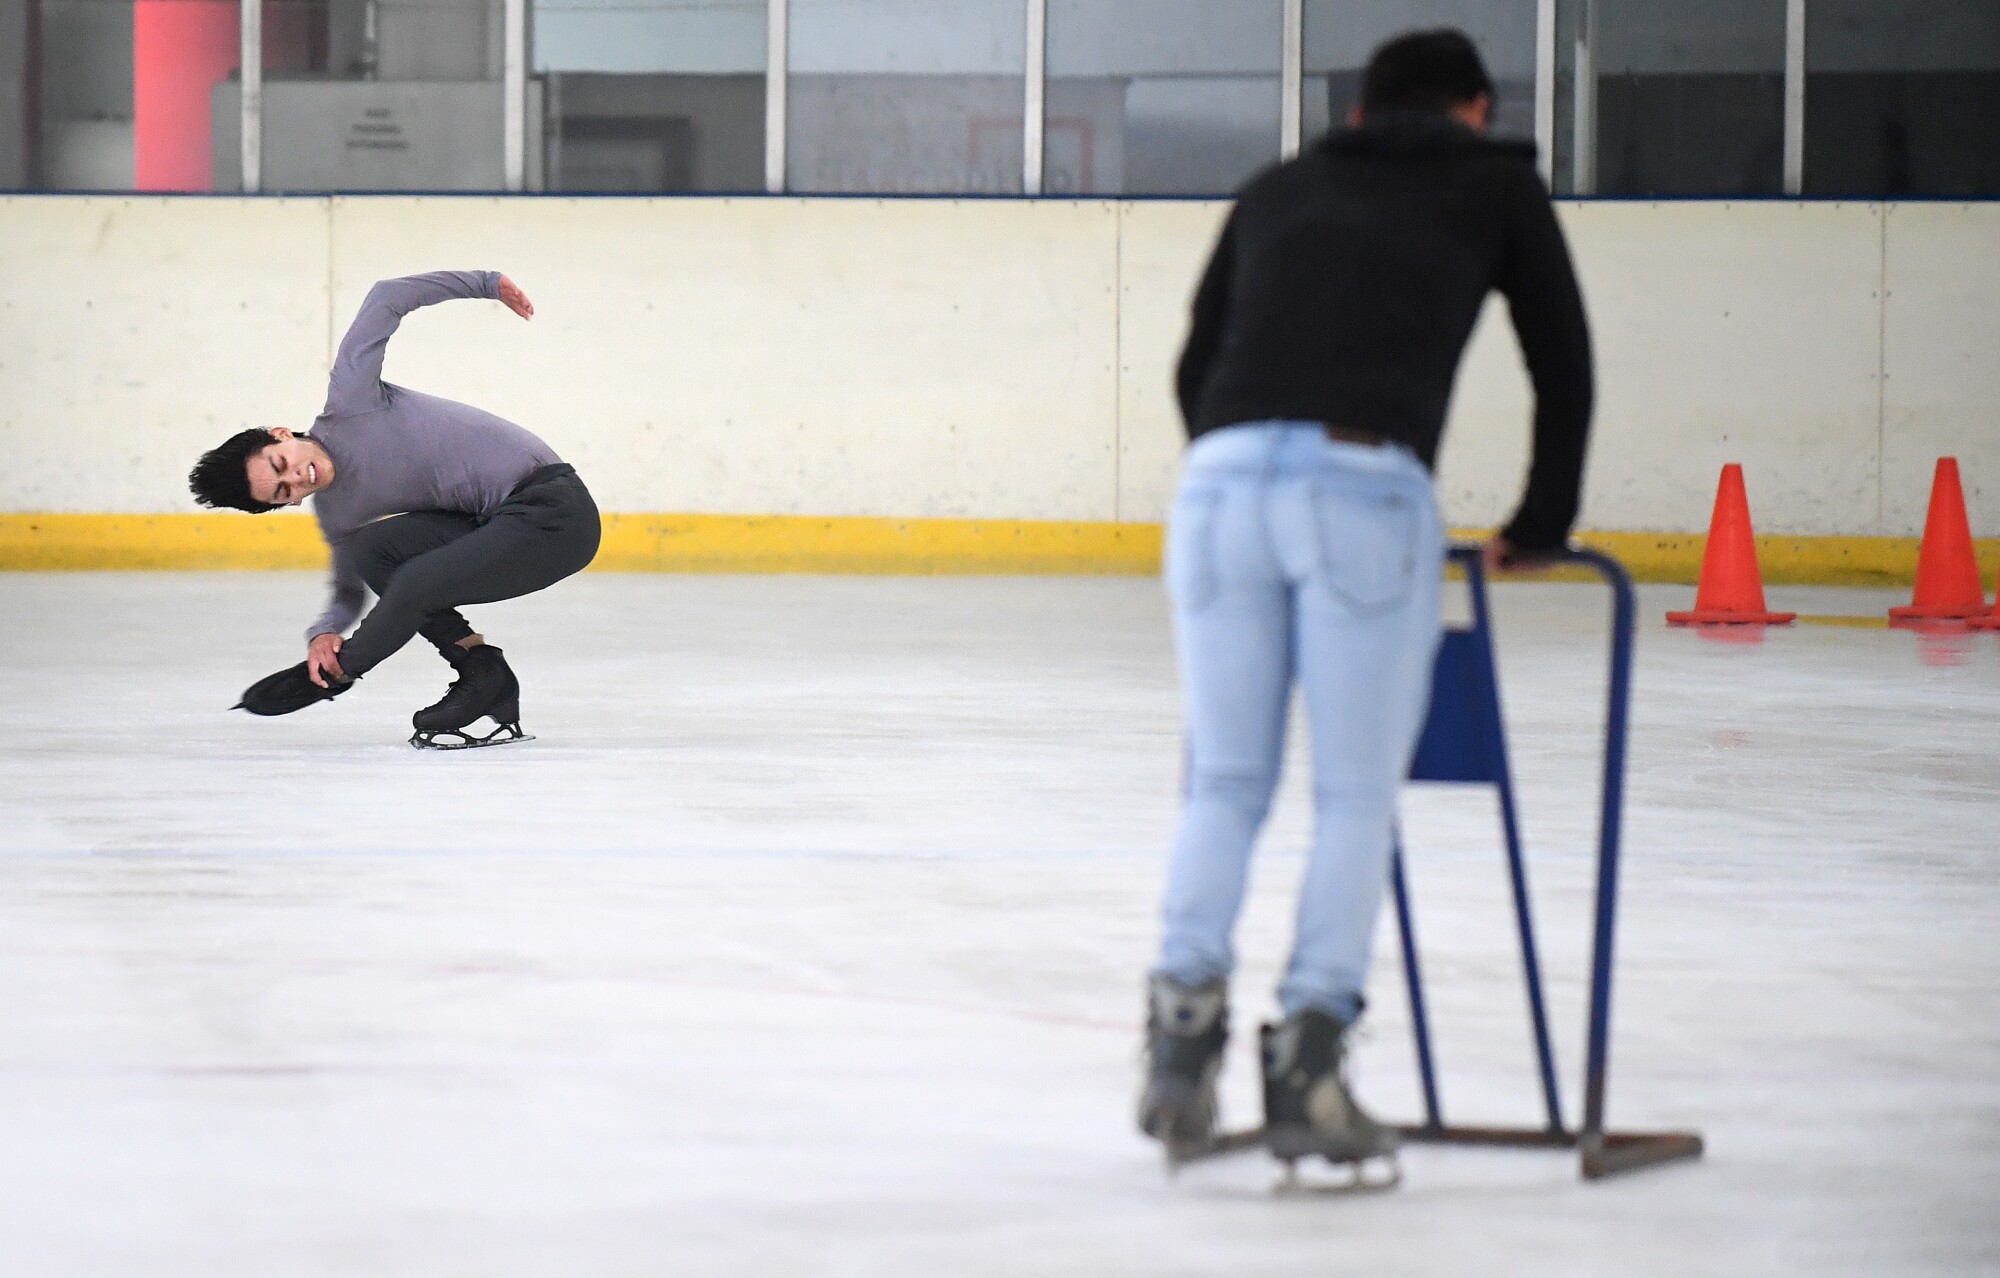 Mexican figure skater Donovan Carrillo shares the ice with beginners during practice 